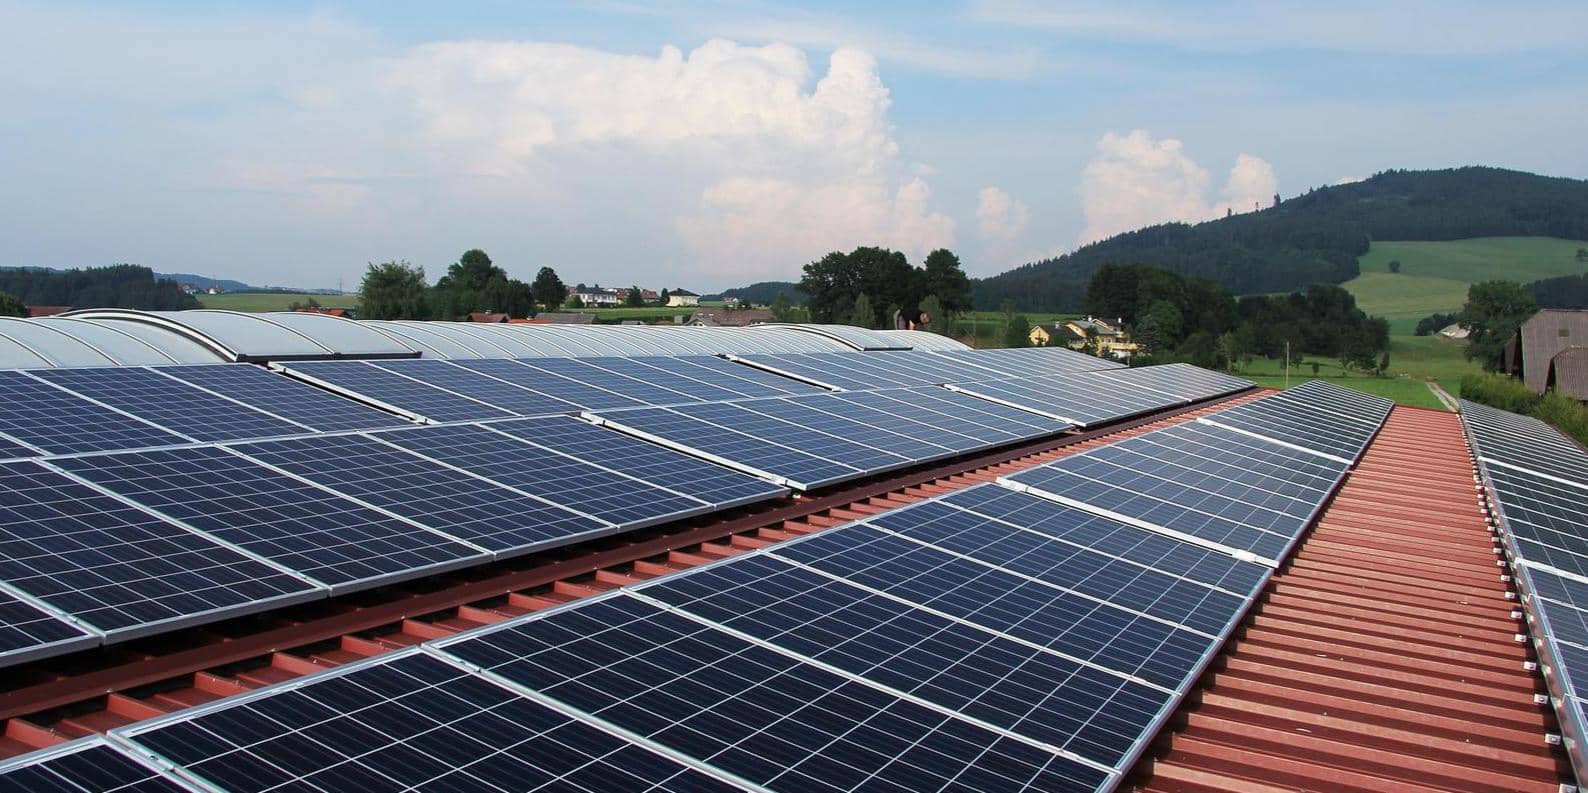 Solar panels installed on the roof of a commercial building in a rural setting with green hills in the background and a clear sky.